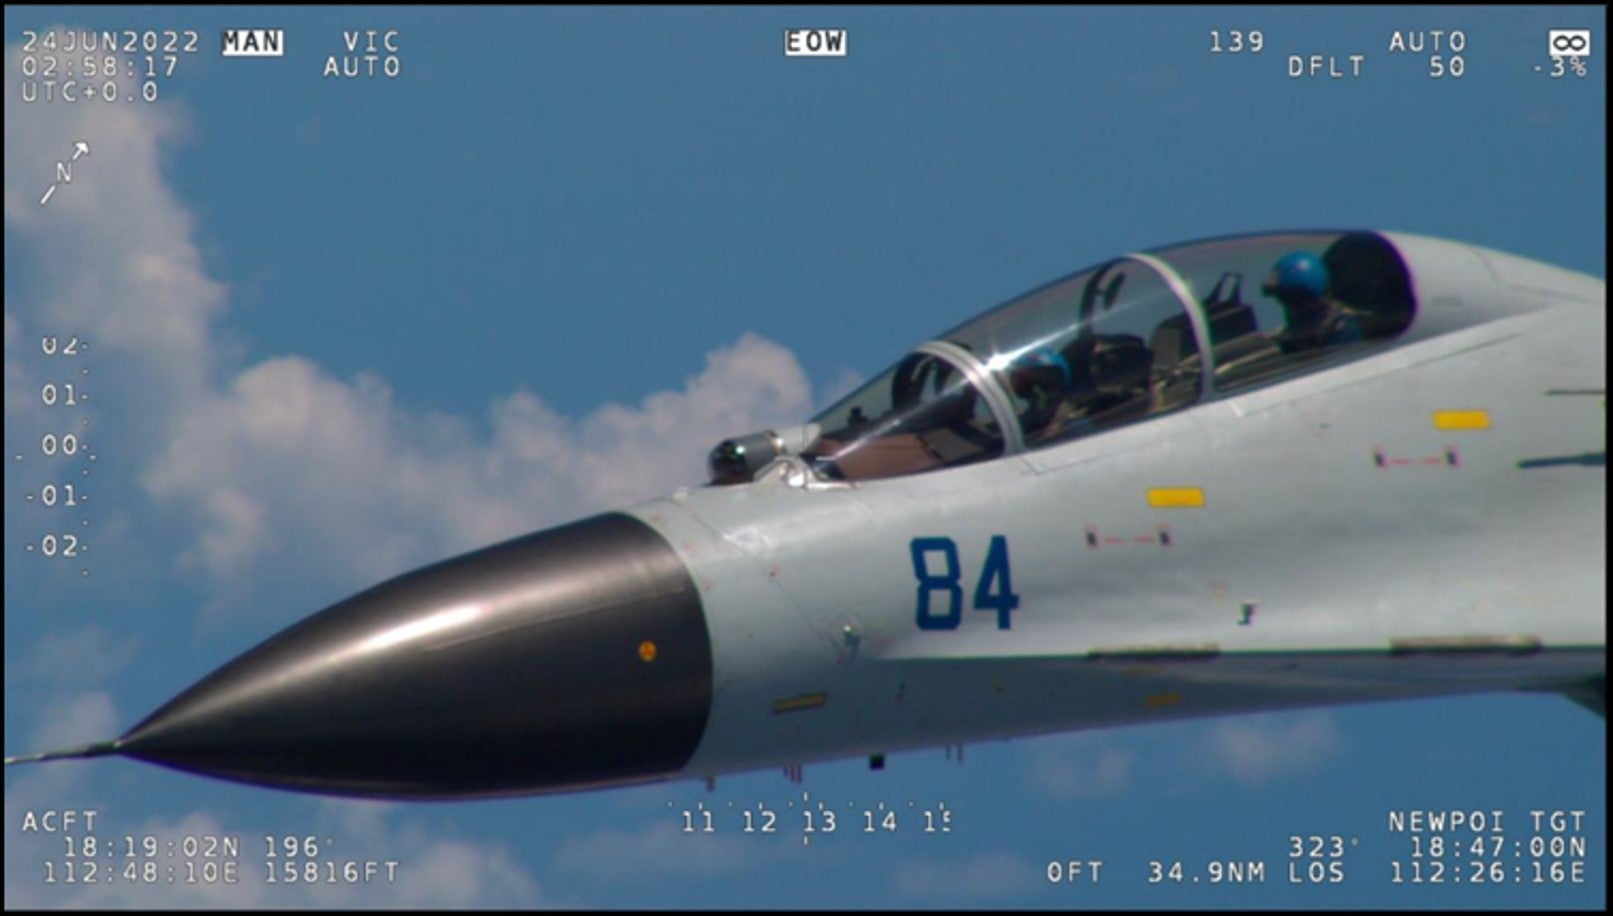 Images and video newly released by the Department capture a PLA fighter jet in the course of conducting a coercive and risky intercept against a lawfully operating U.S. asset in the South China Sea, including by approaching a distance of just 40 feet before repeatedly flying above and below the U.S. aircraft and flashing its weapons.  After the U.S. operator radioed the PLA fighter jet, the PLA pilot responded using explicit language, including an expletive.